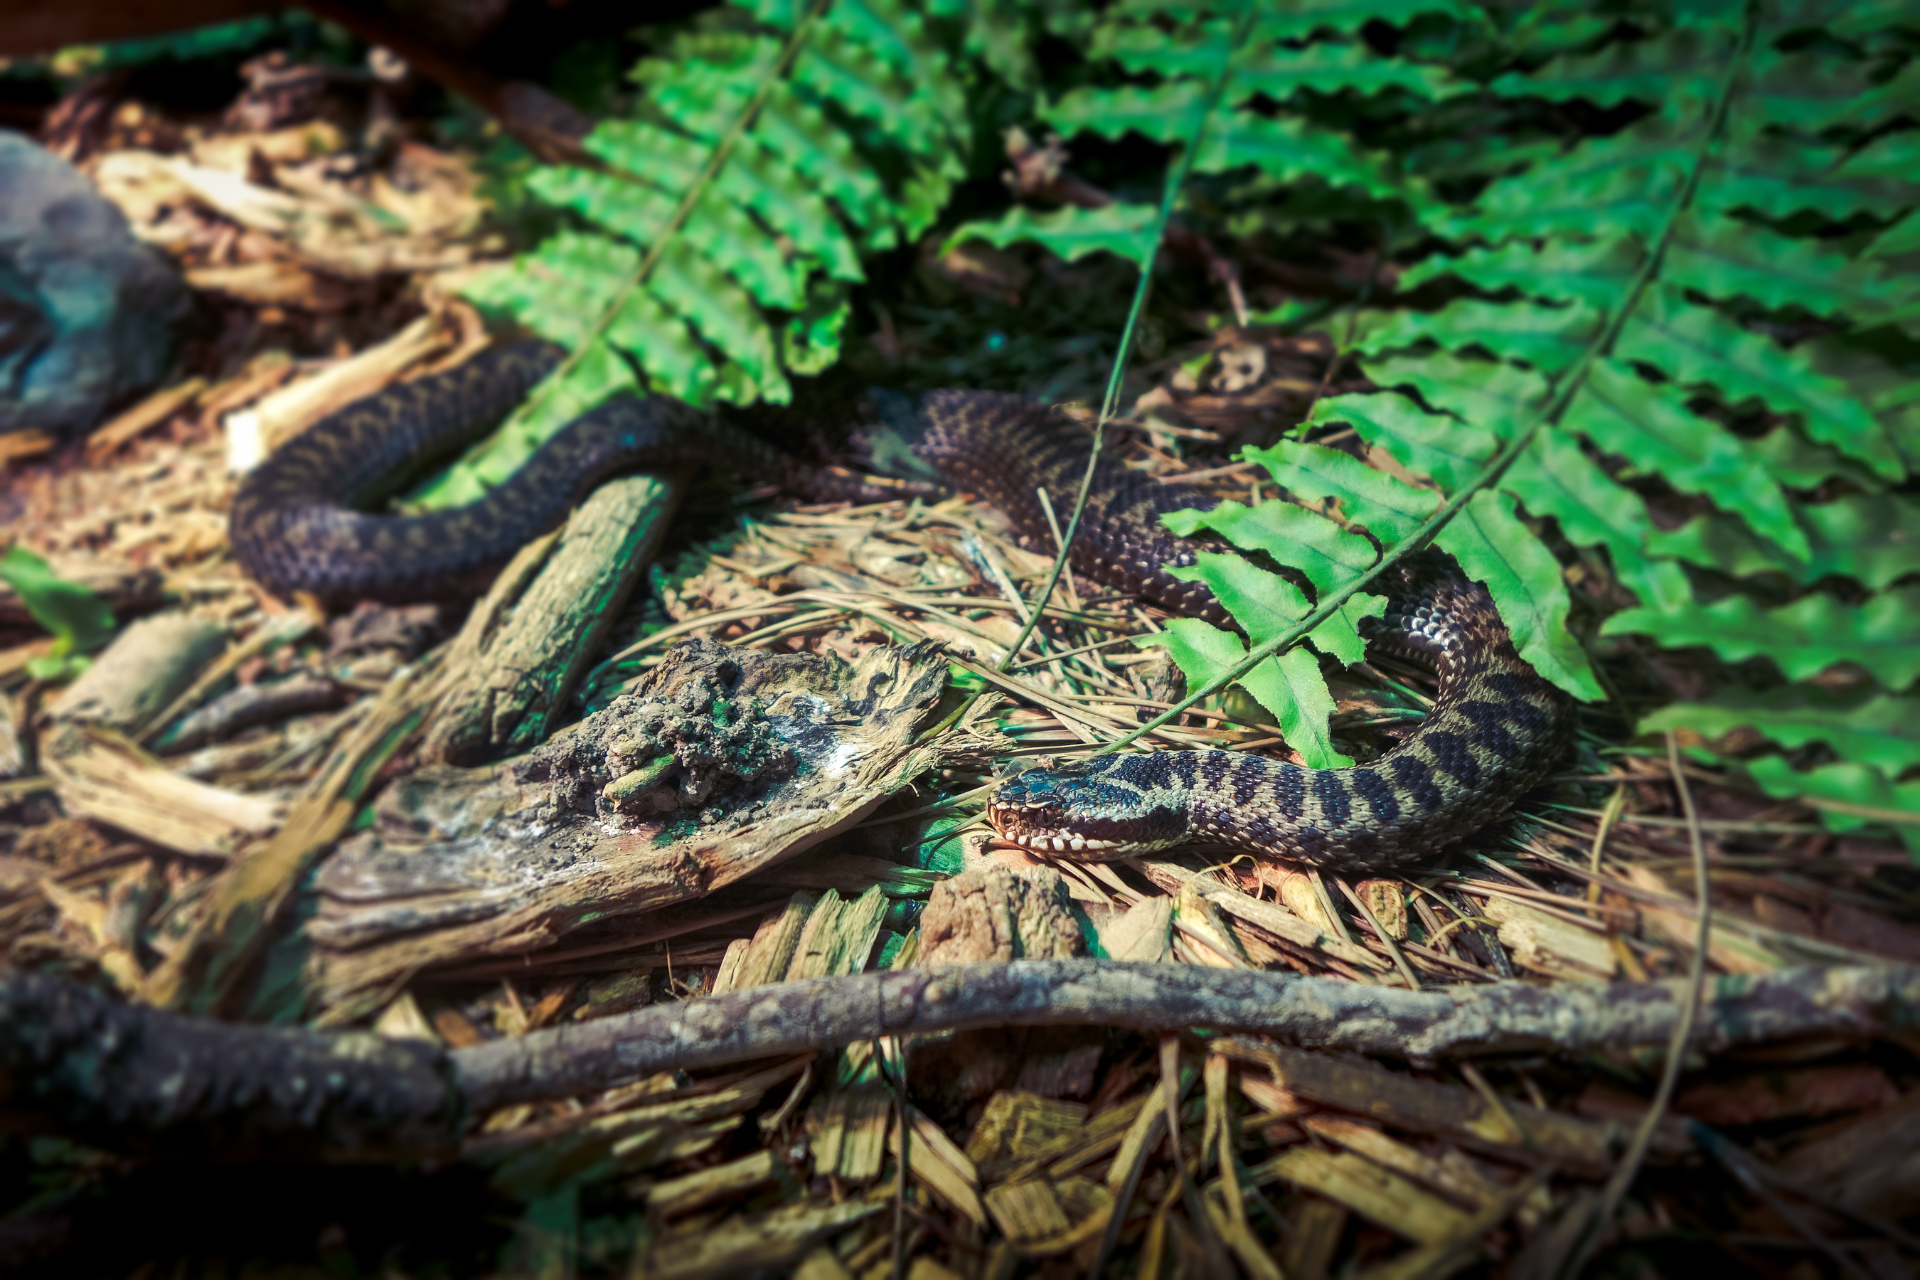 A snake is laying on the ground in the woods surrounded by ferns.